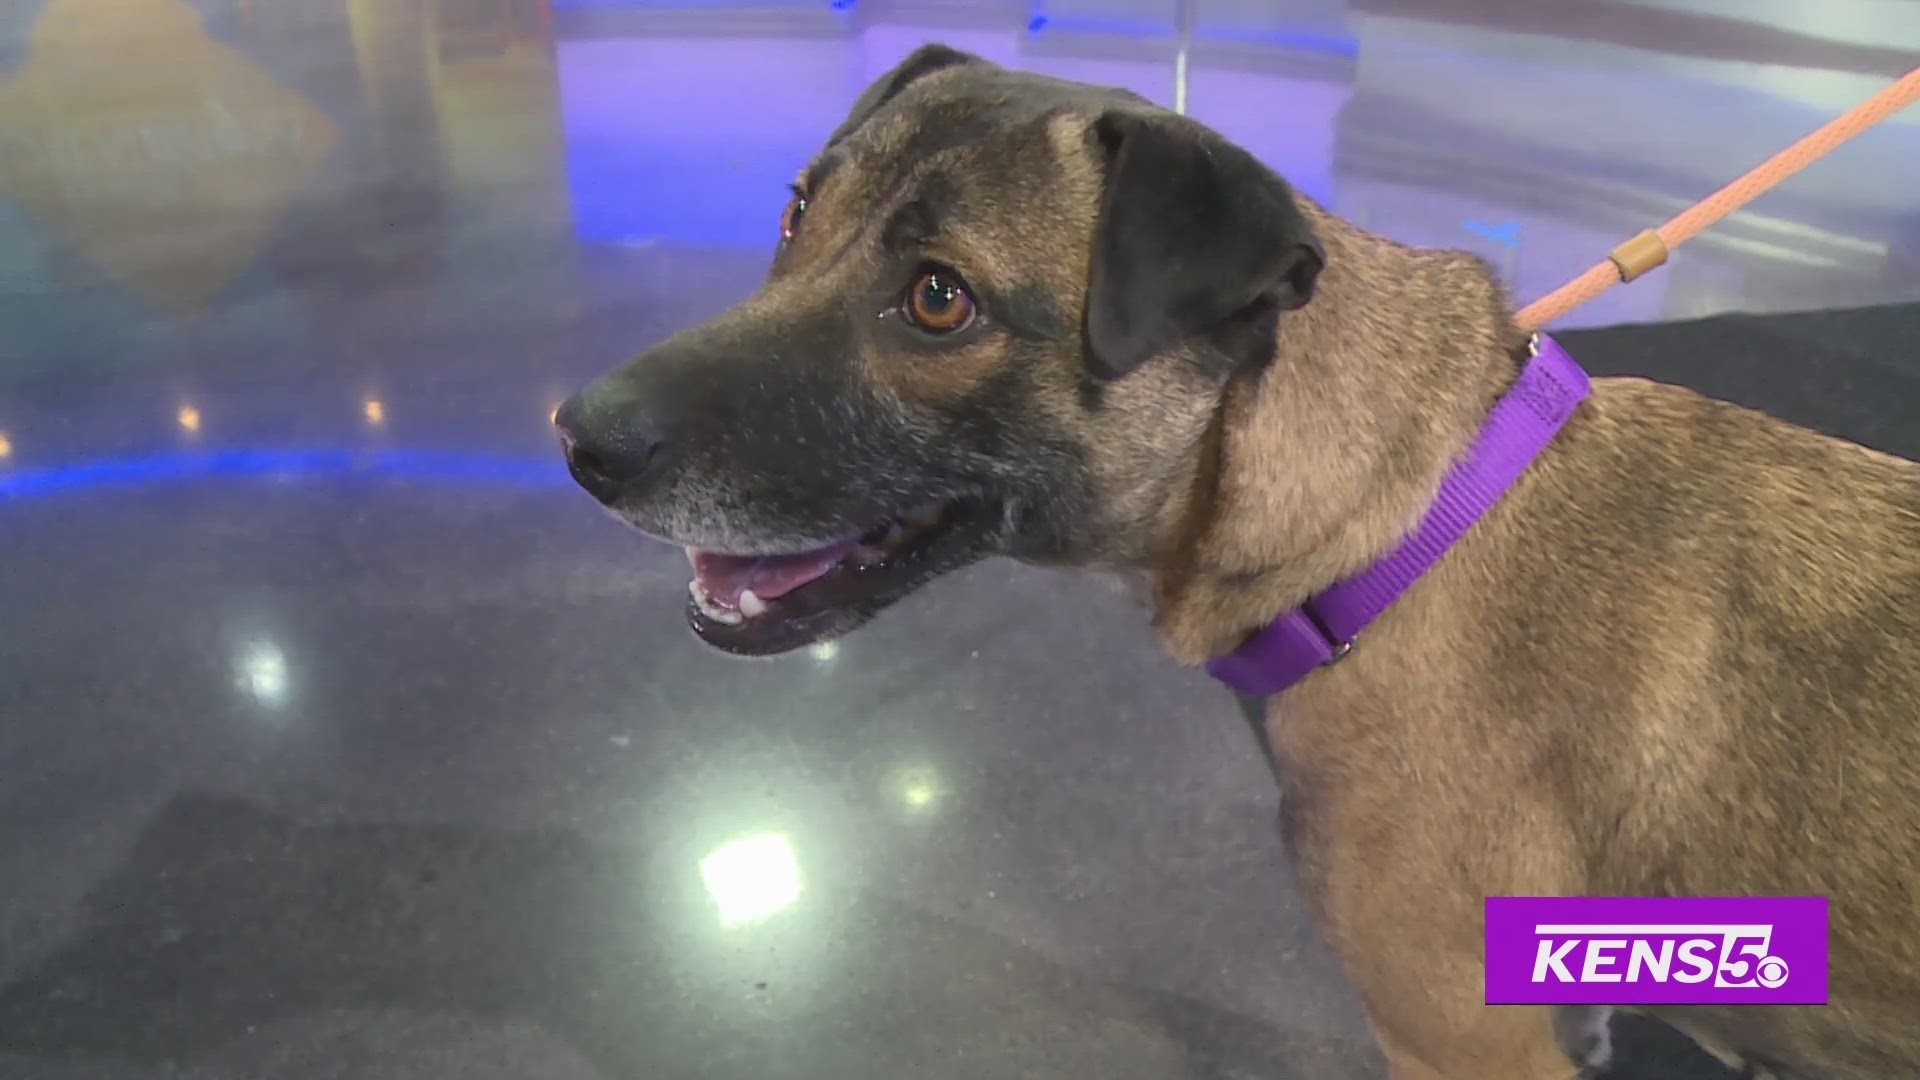 San Antonio Pets Alive brings some furry friends who are available to be fostered or given their fur-ever homes.